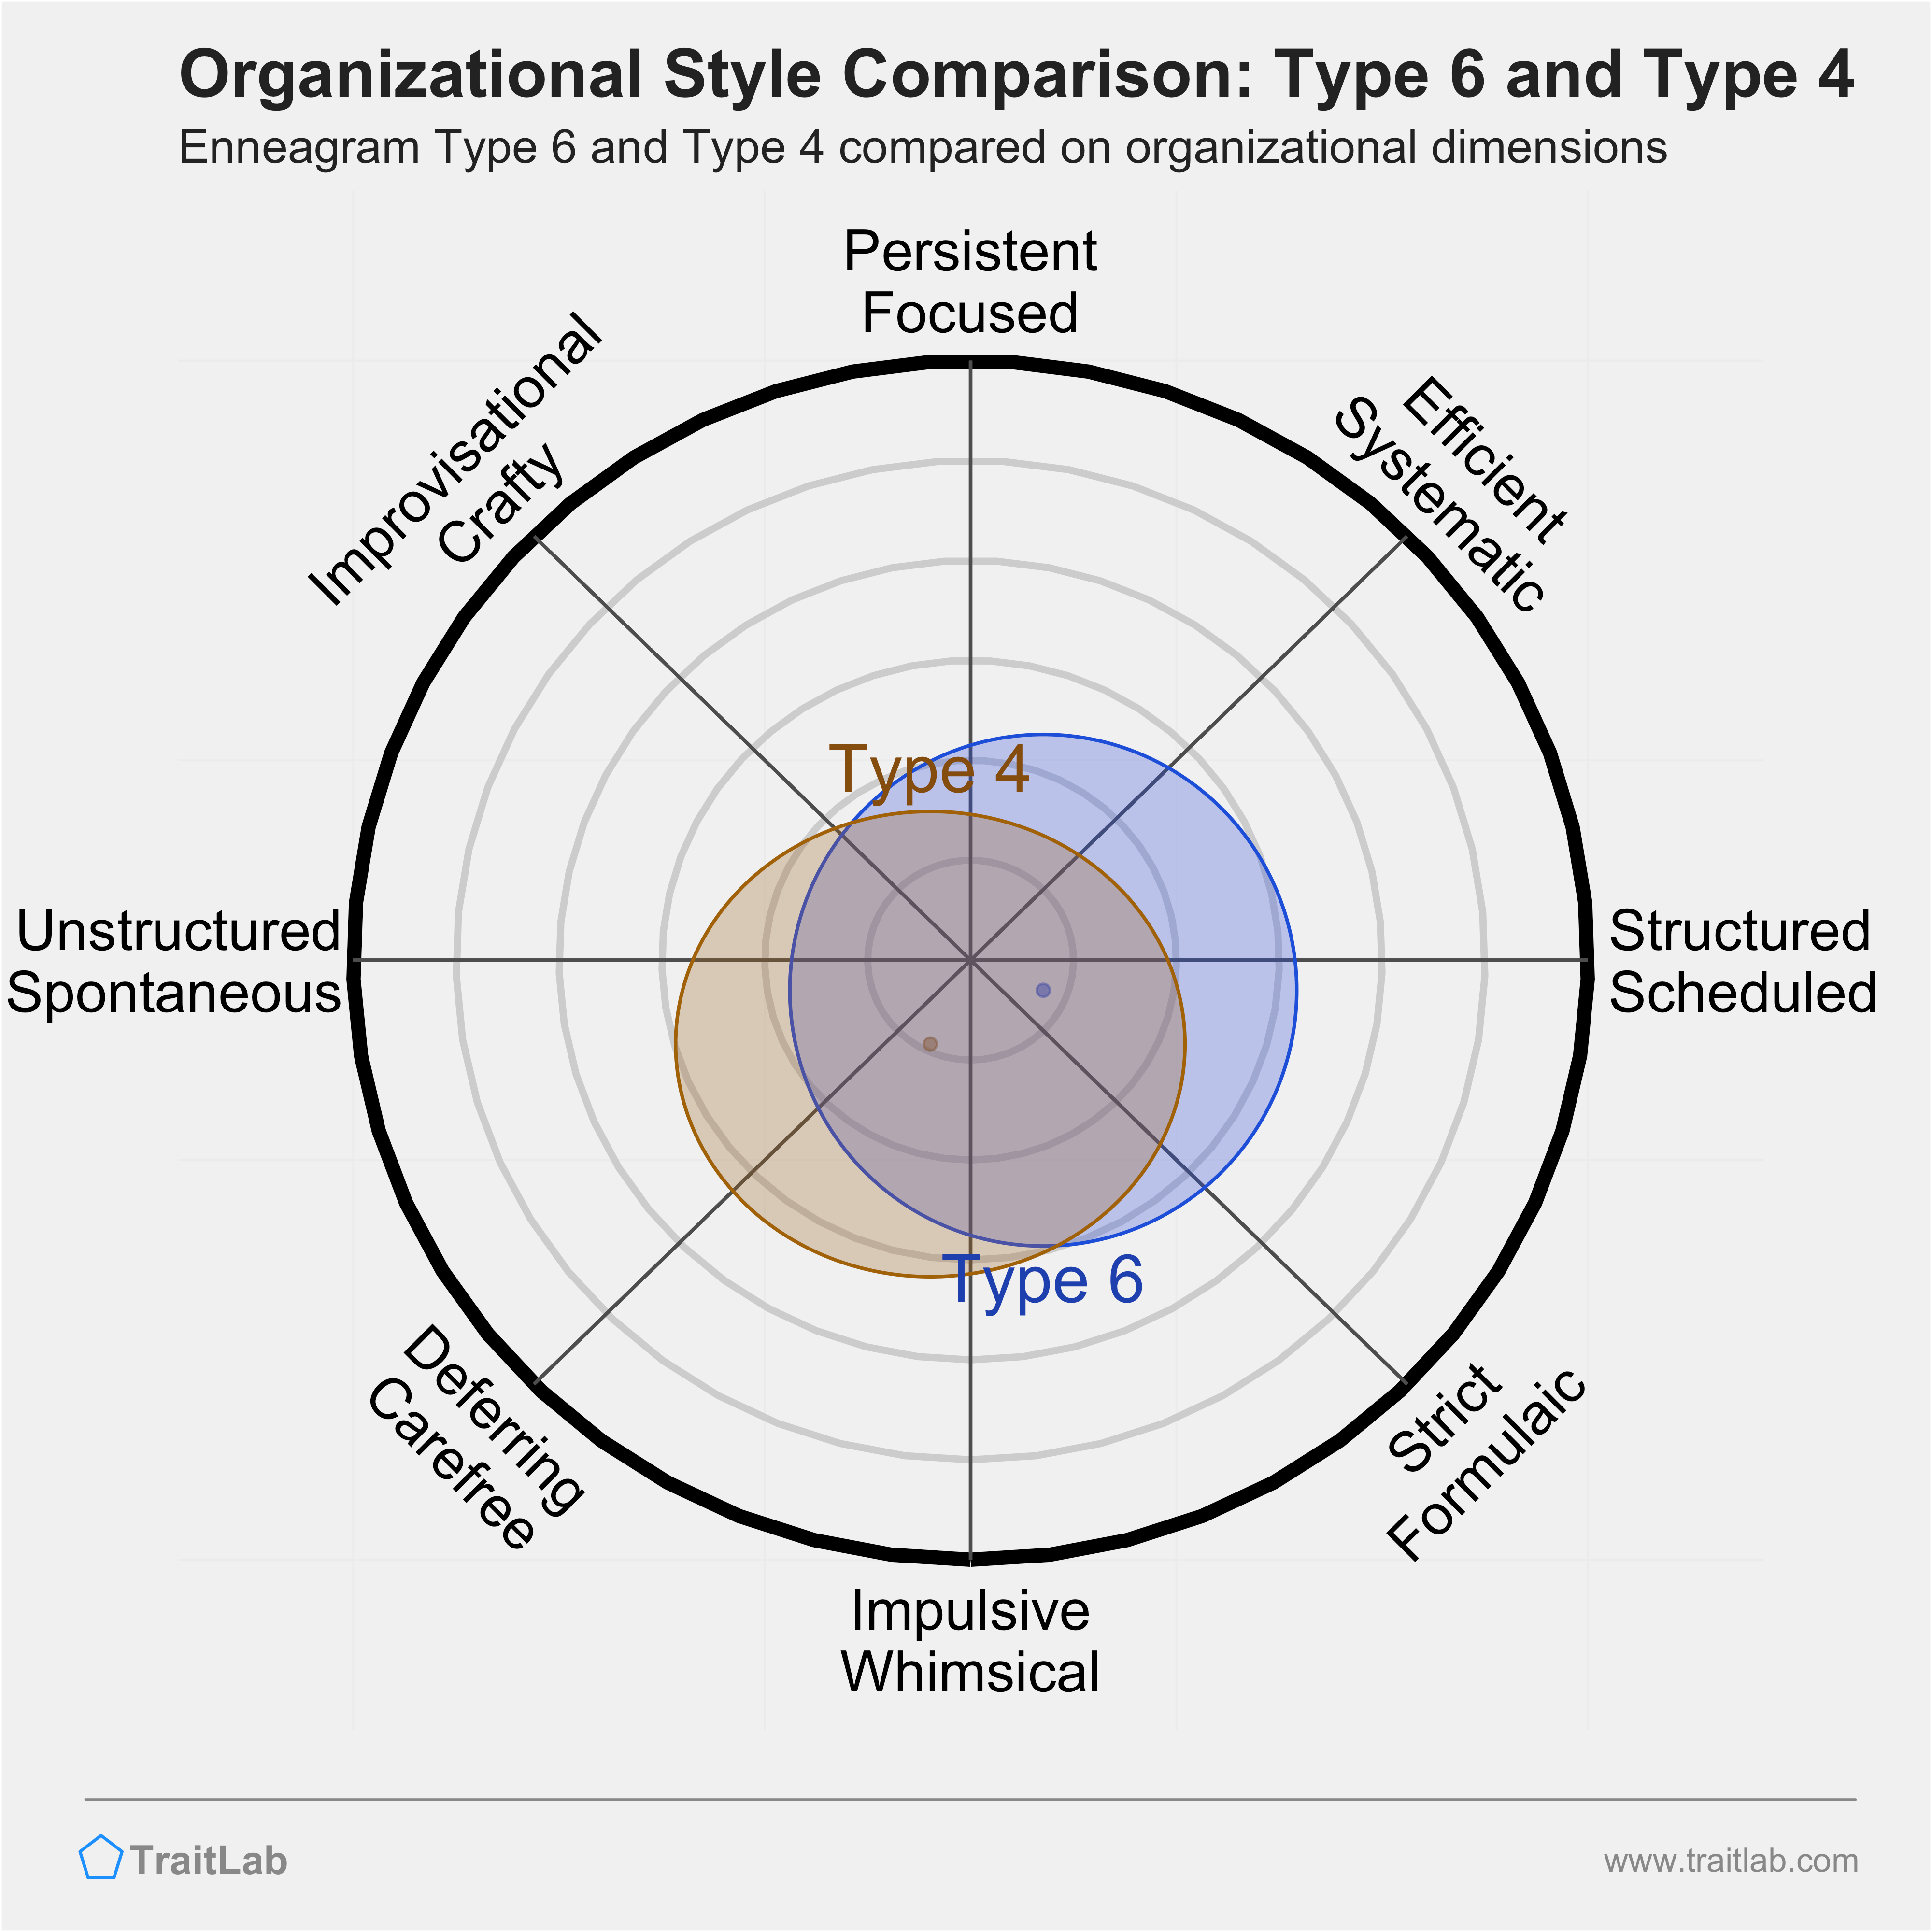 Type 6 and Type 4 comparison across organizational dimensions